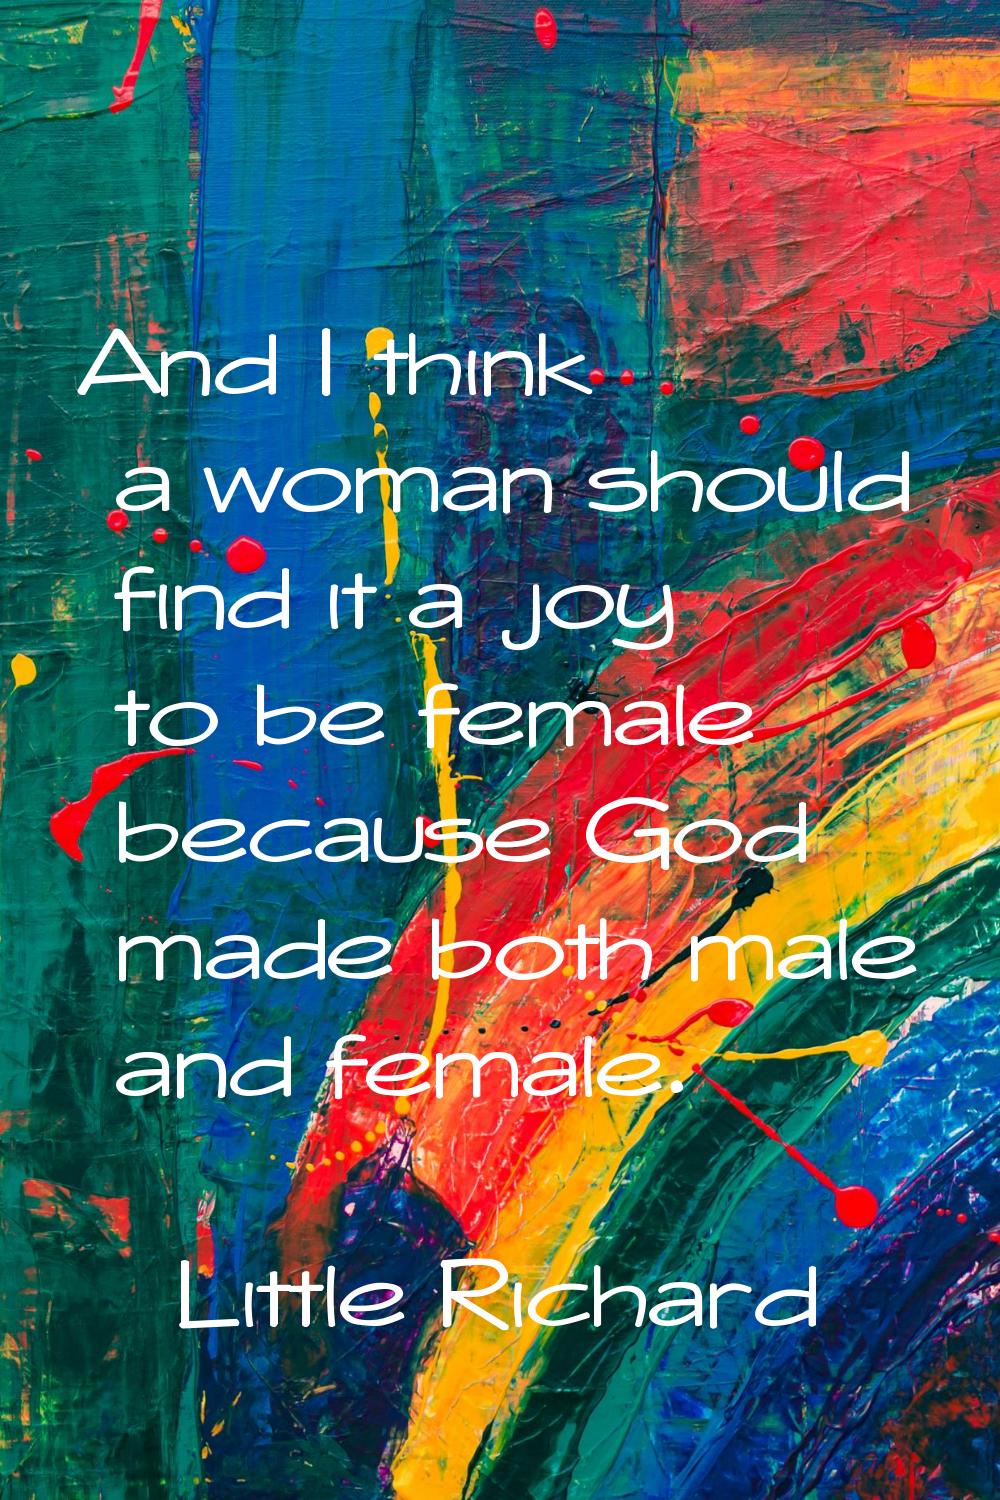 And I think a woman should find it a joy to be female because God made both male and female.